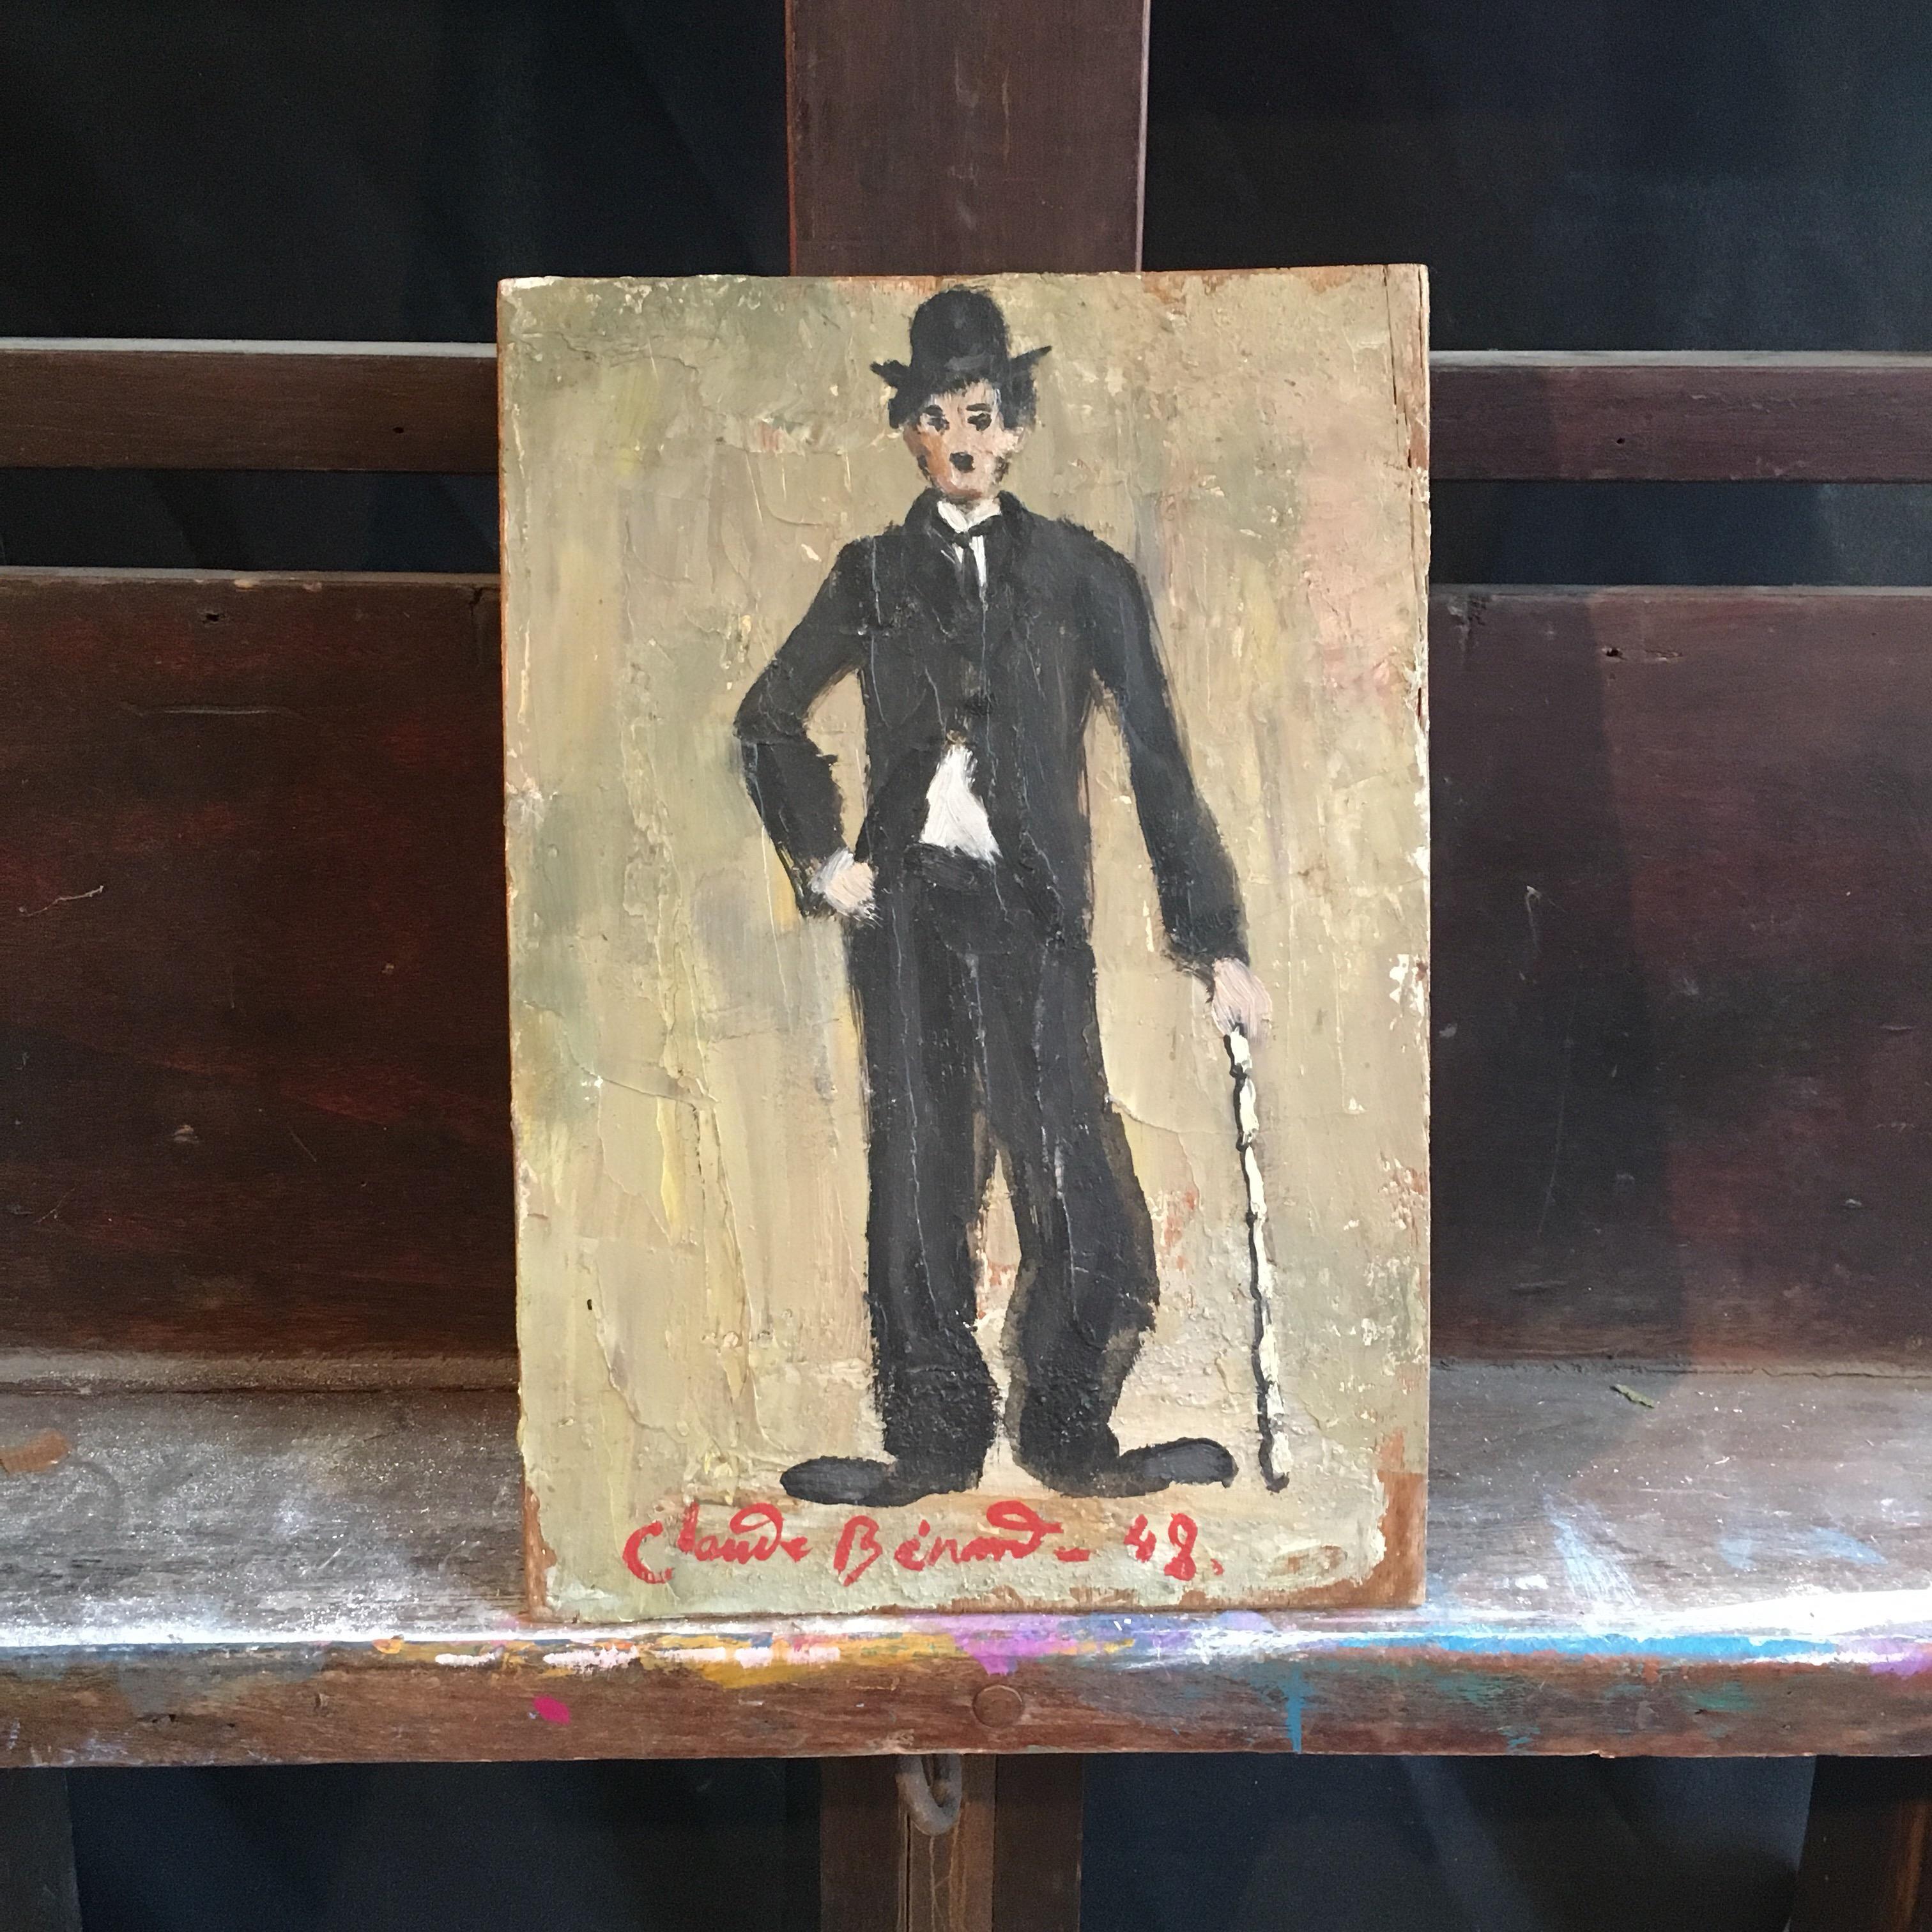 Charlie Chaplin, Impressionist Portrait, Signed Oil Painting
By French artist Claude Benard, (1926 - 2016)
Signed by the artist on the lower right hand corner
Oil painting on board, unframed
Board size: 11 x 7.5 inches

Fabulous portrait of the